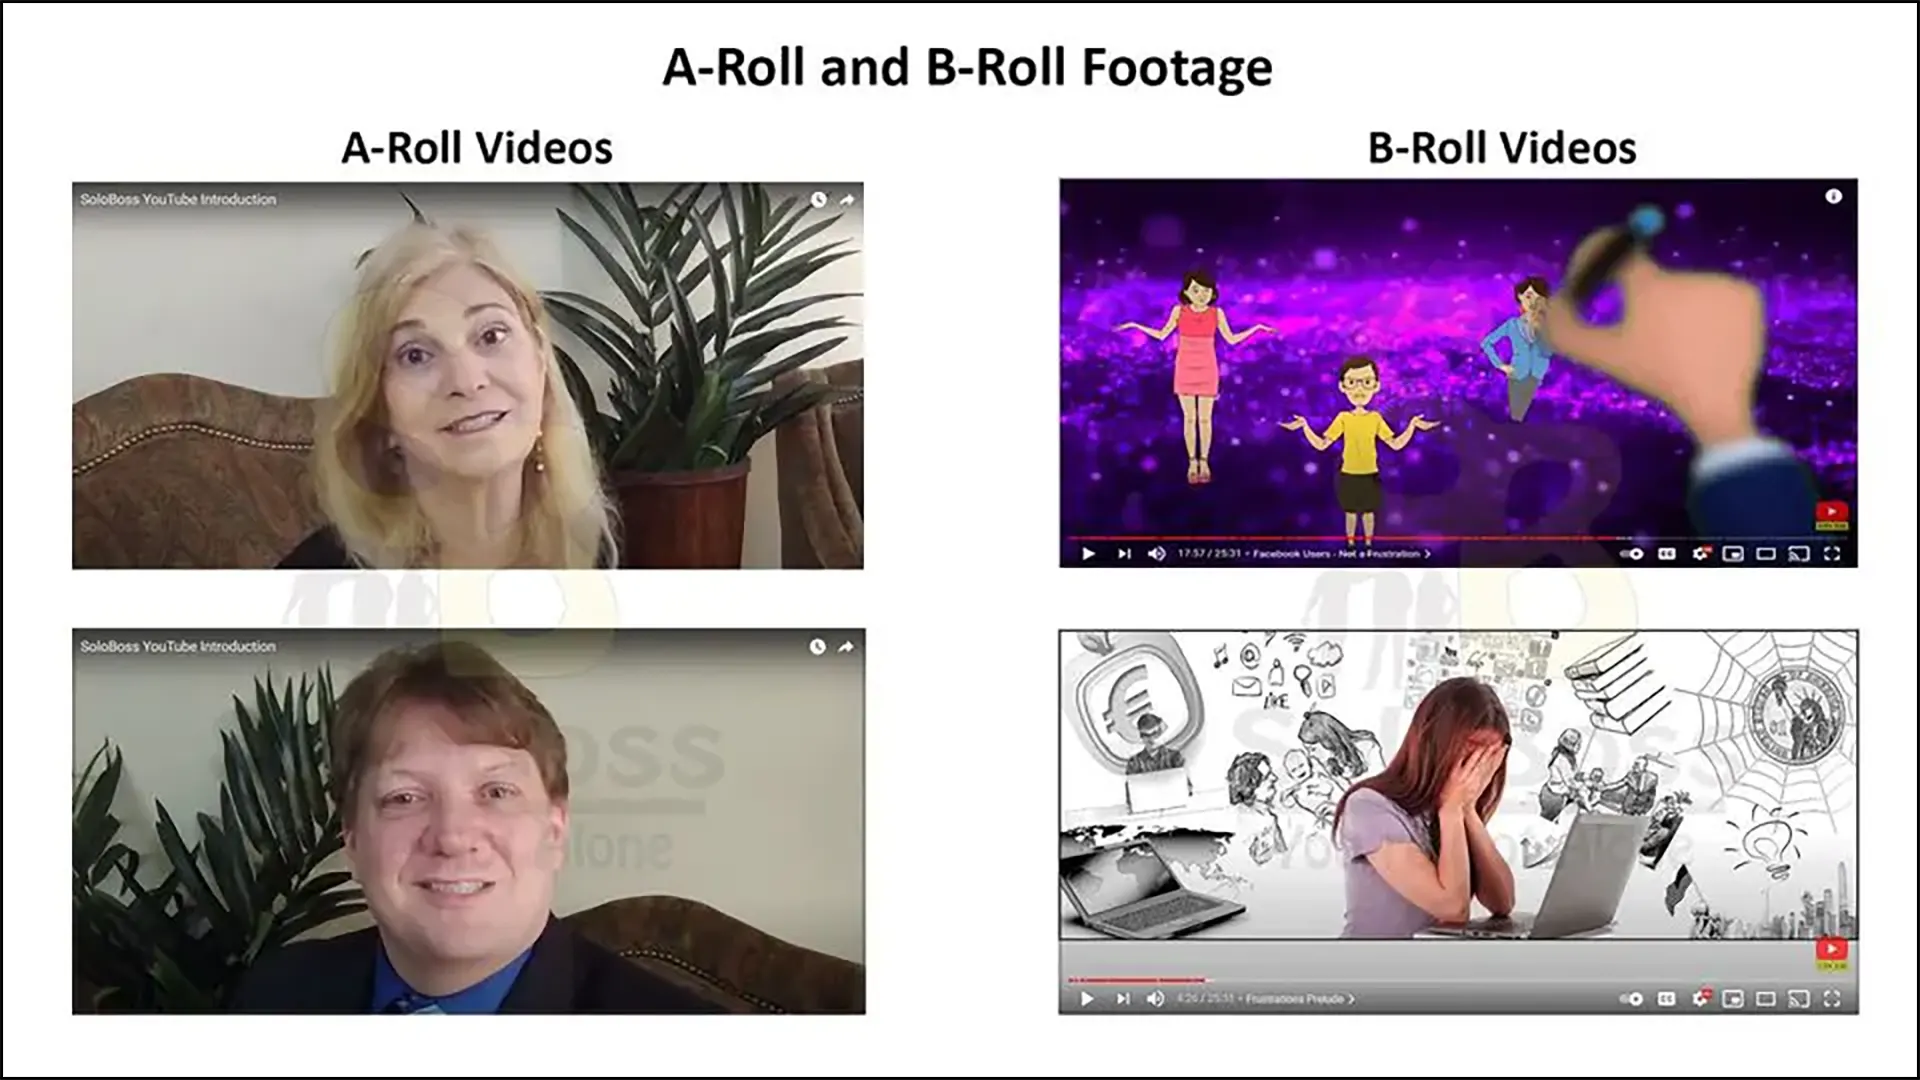 Displaying the difference between A and B Roll videos.